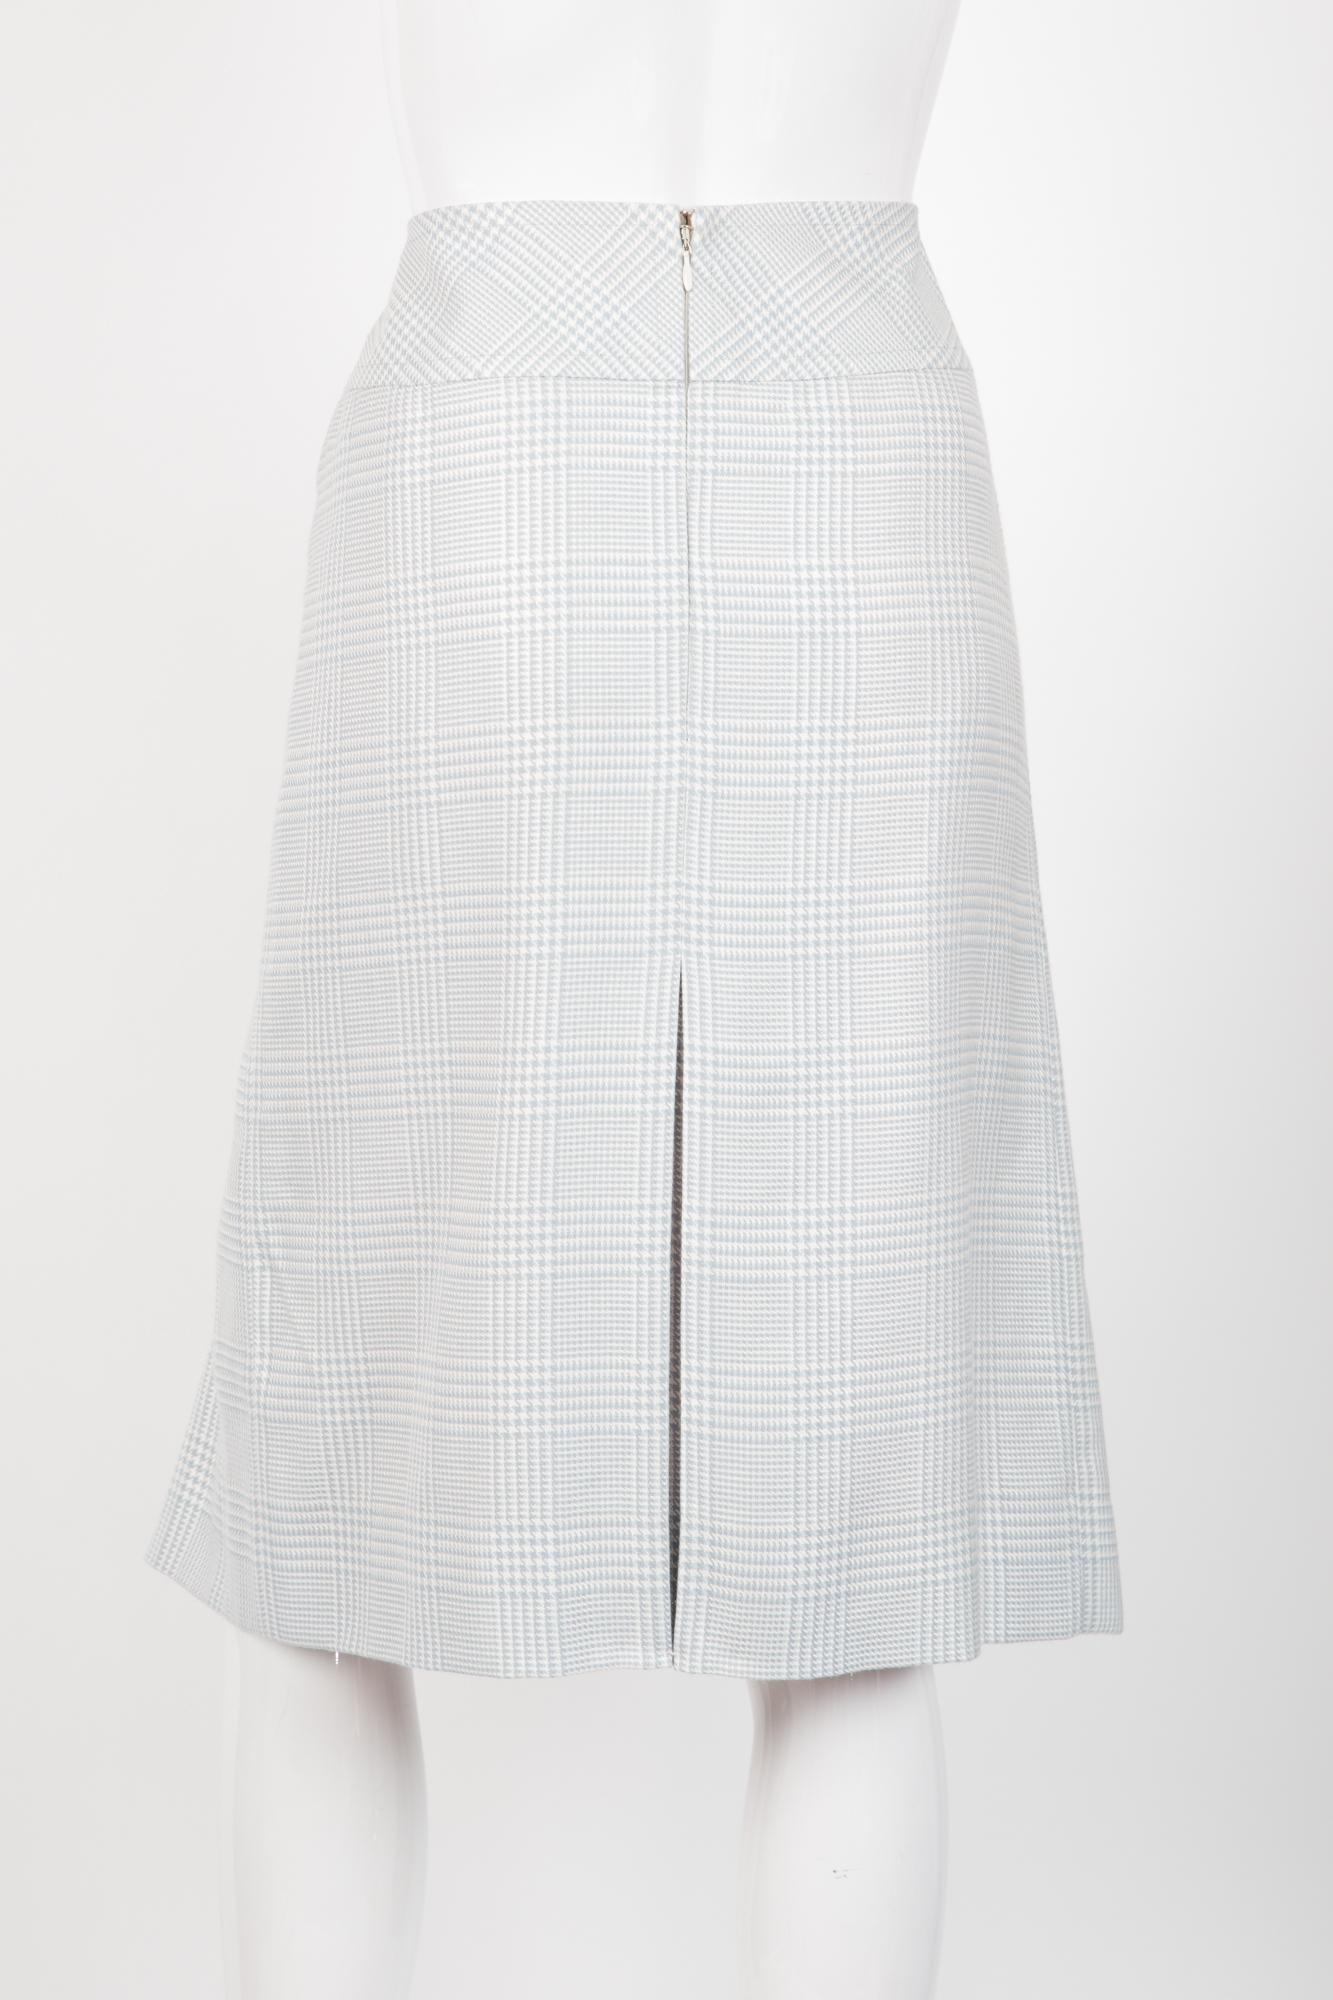 Celine iconic blue wool skirt featuring a front logo gold tone chain, an ivory and a pale blue-grey check pattern, a center back zip opening, front pleats.
55% wool, 45%viscose
Estimated size 40fr/US8/UK12
We guarantee you will receive this gorgeous